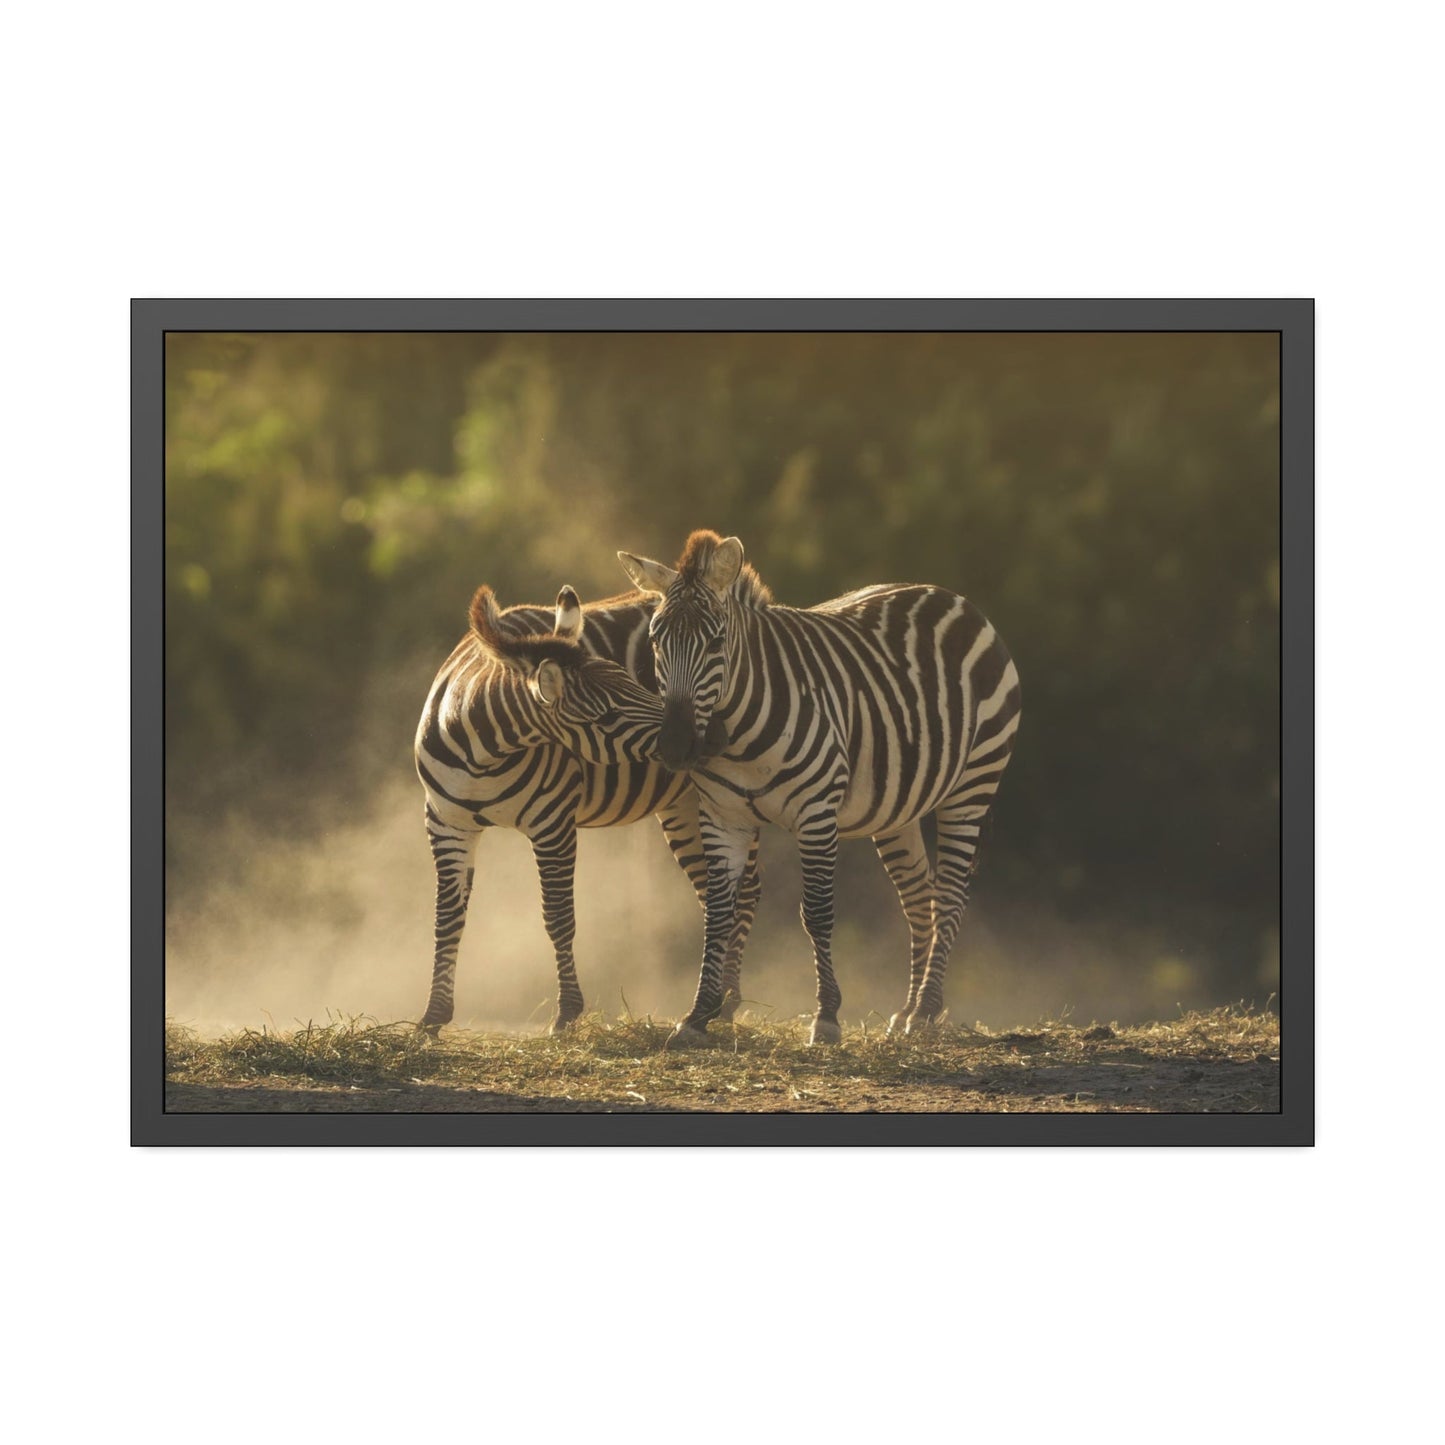 Wild Stripes: Stunning Zebras Canvas Print for Your Walls